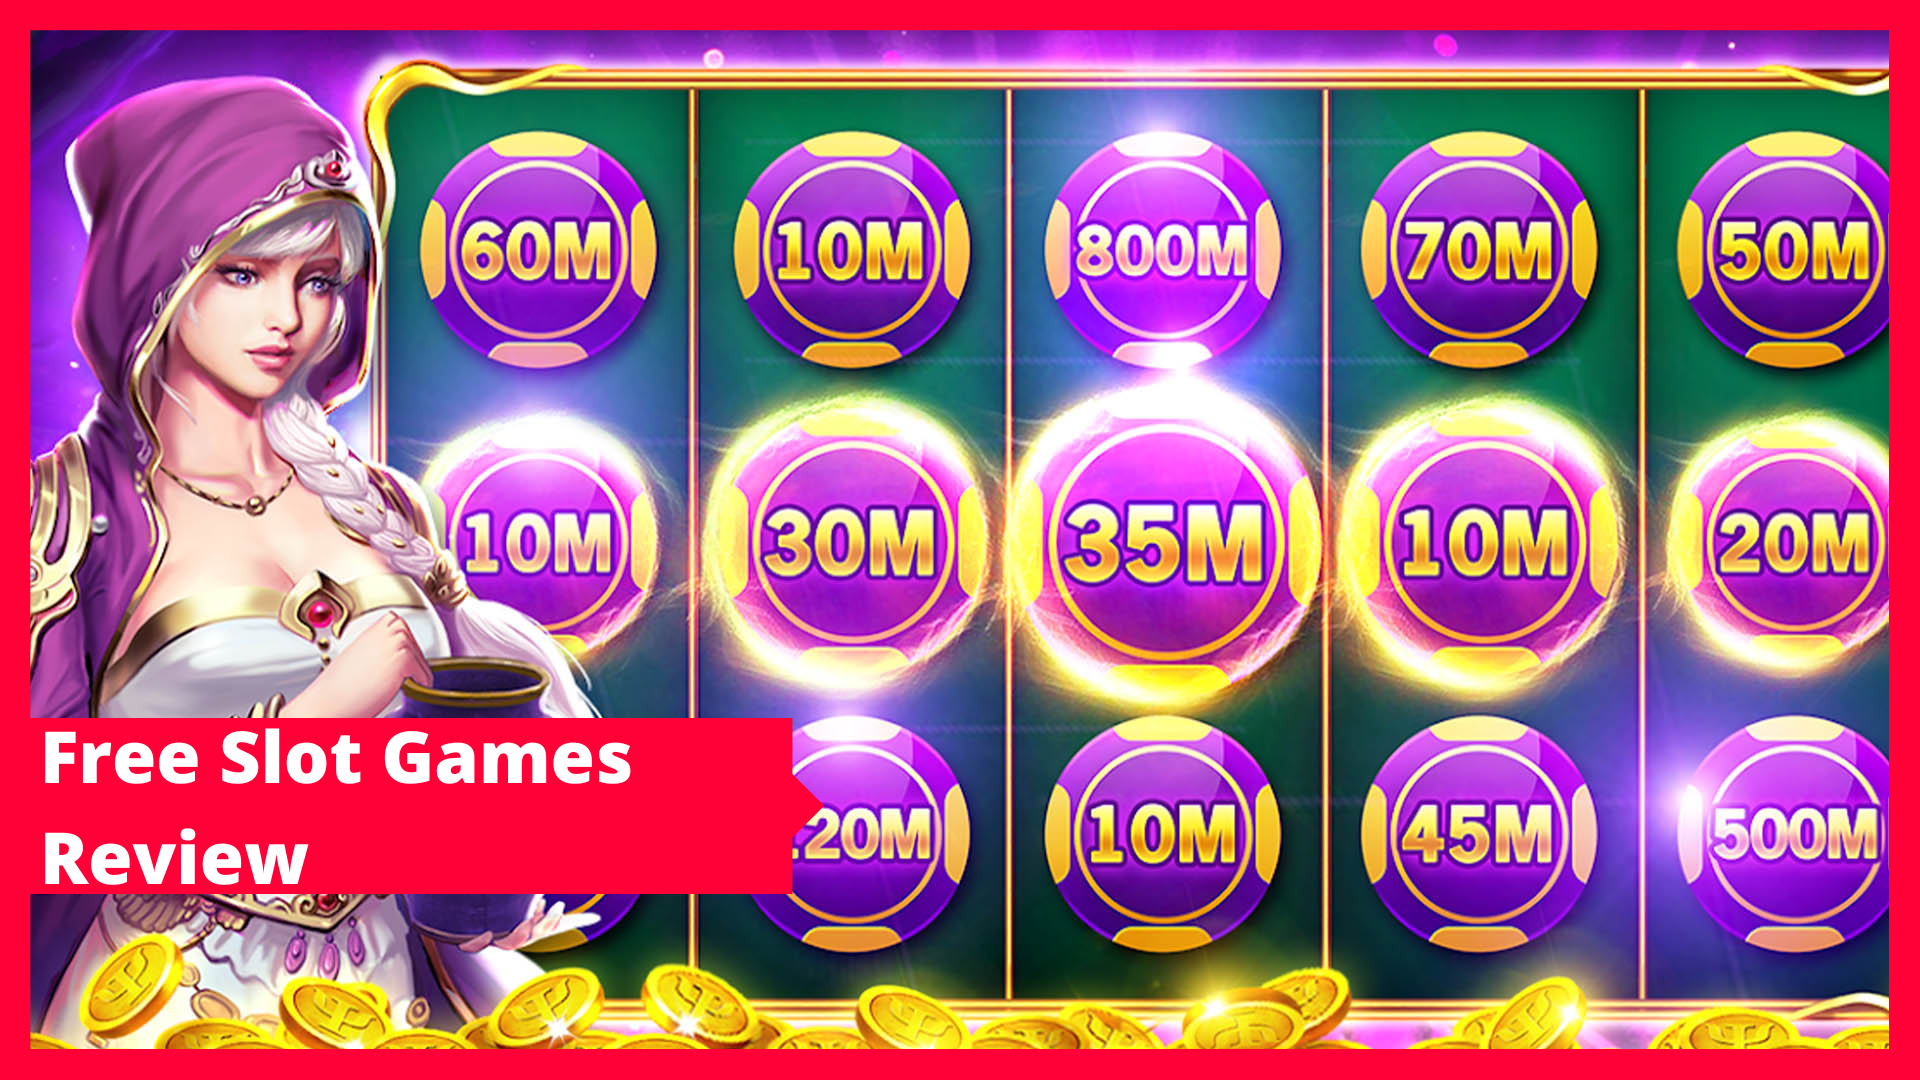 Free slot games review